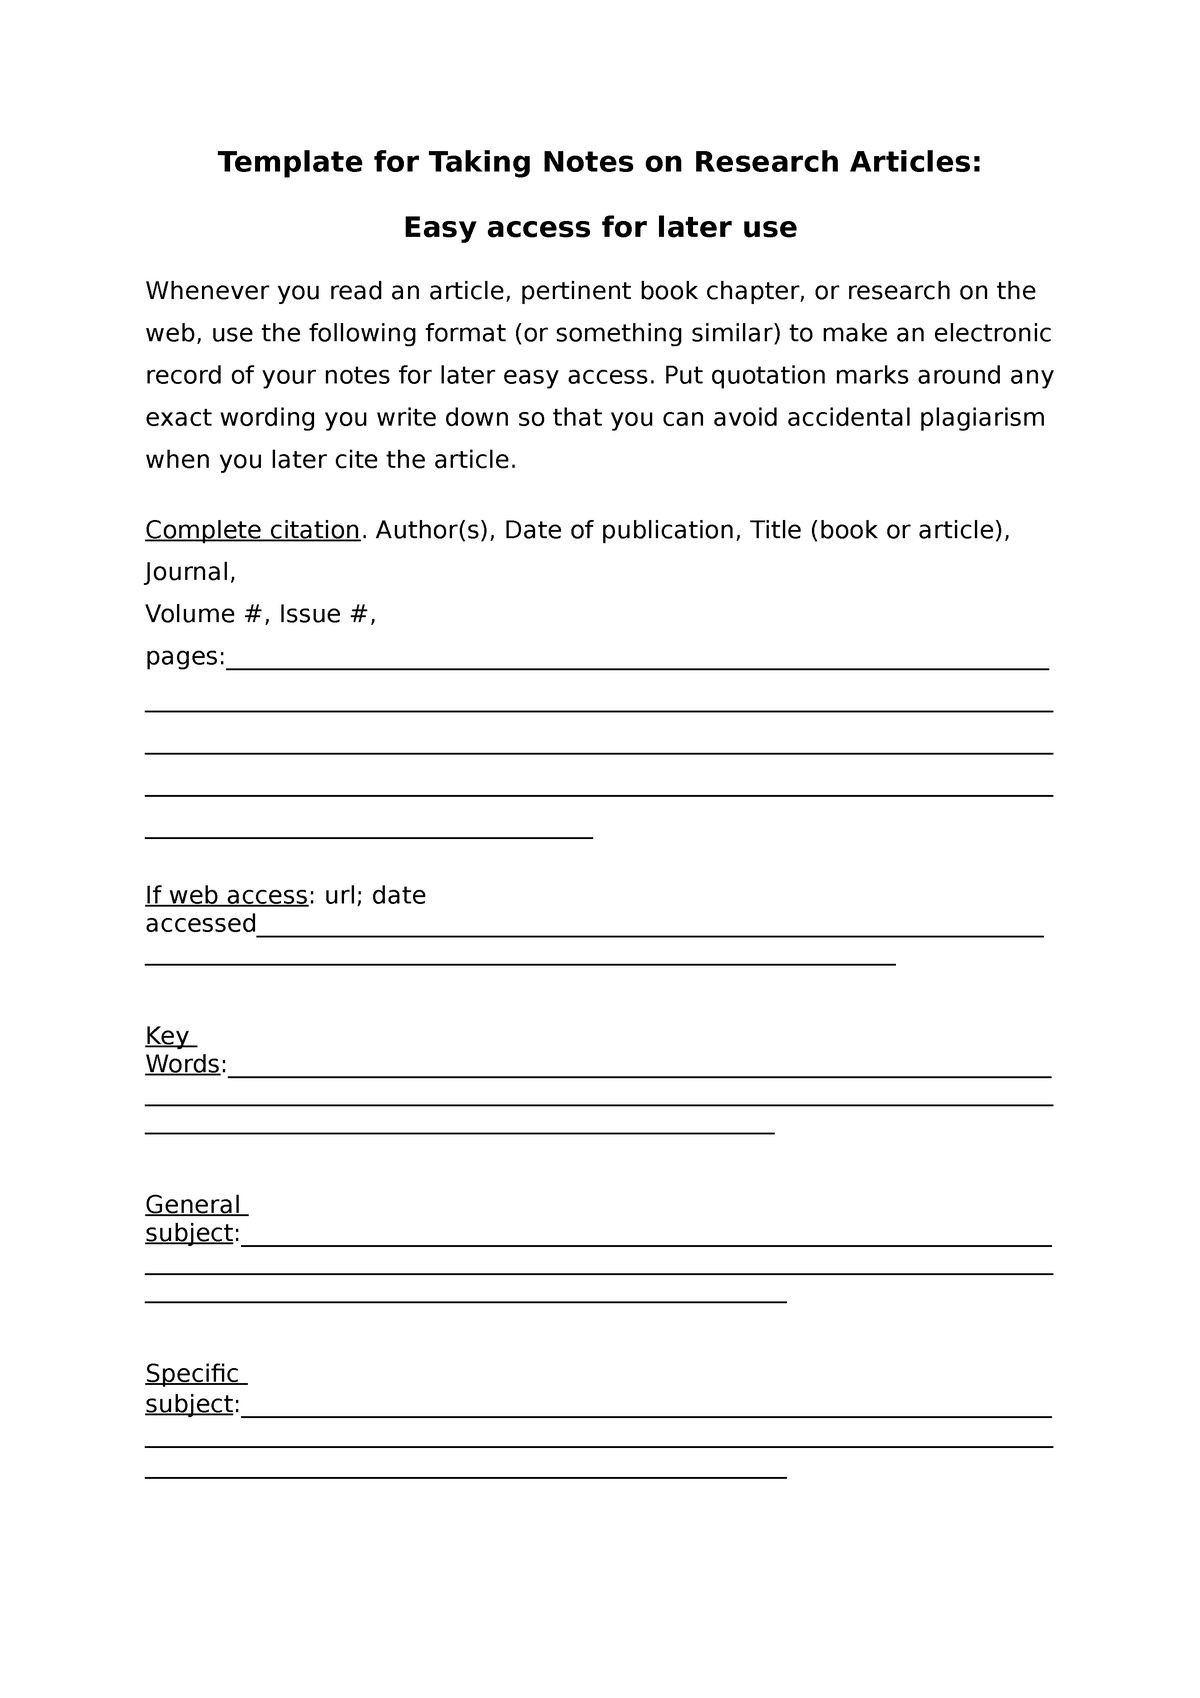 Template for Taking Notes on Research Articles Put quotation marks